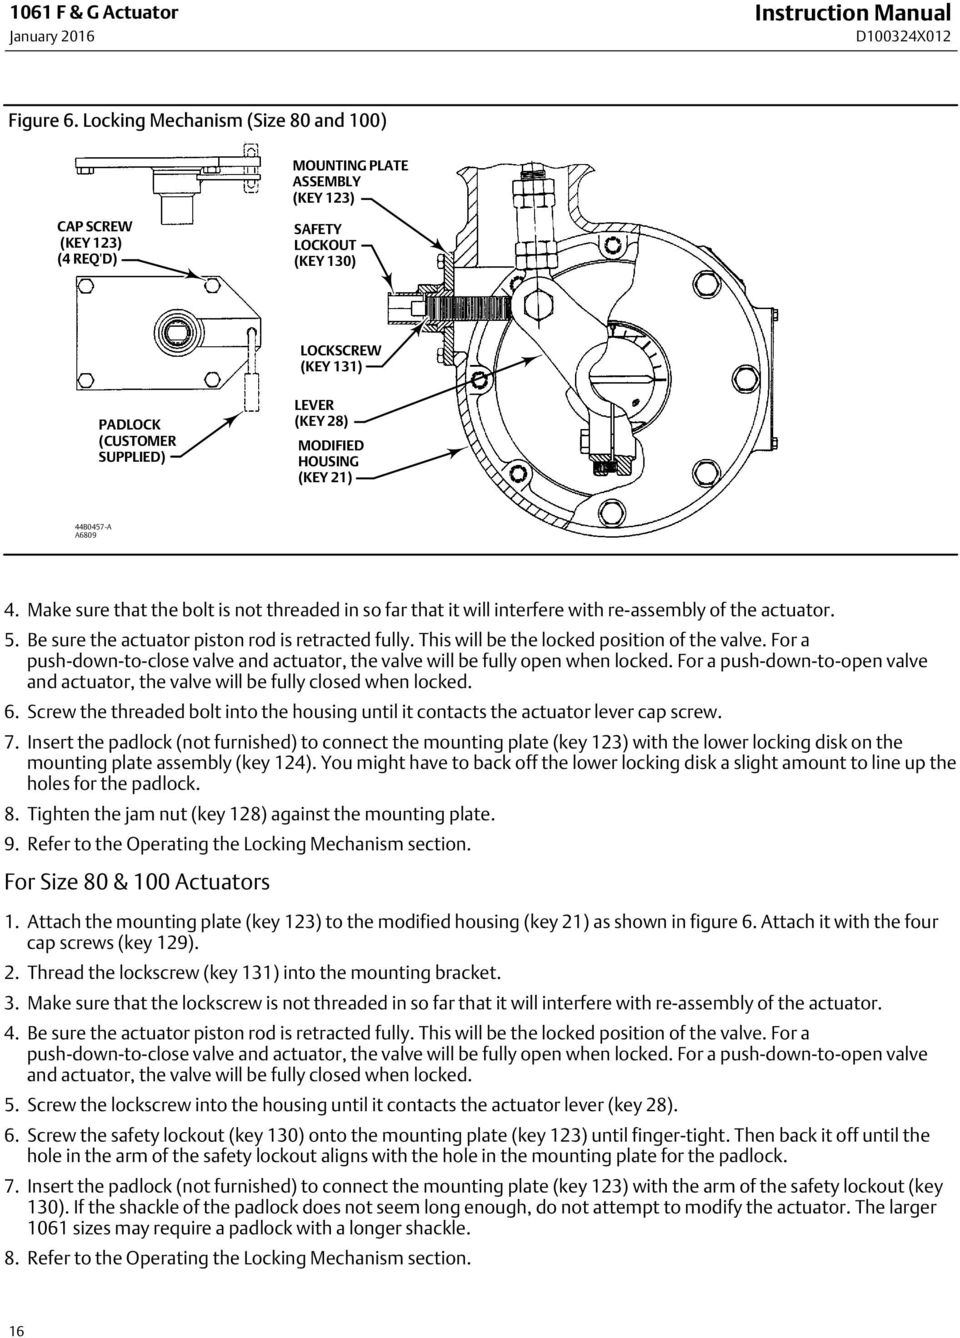 HOUSING (KEY 21) 44B0457 A A6809 4. Make sure that the bolt is not threaded in so far that it will interfere with re assembly of the actuator. 5. Be sure the actuator piston rod is retracted fully.